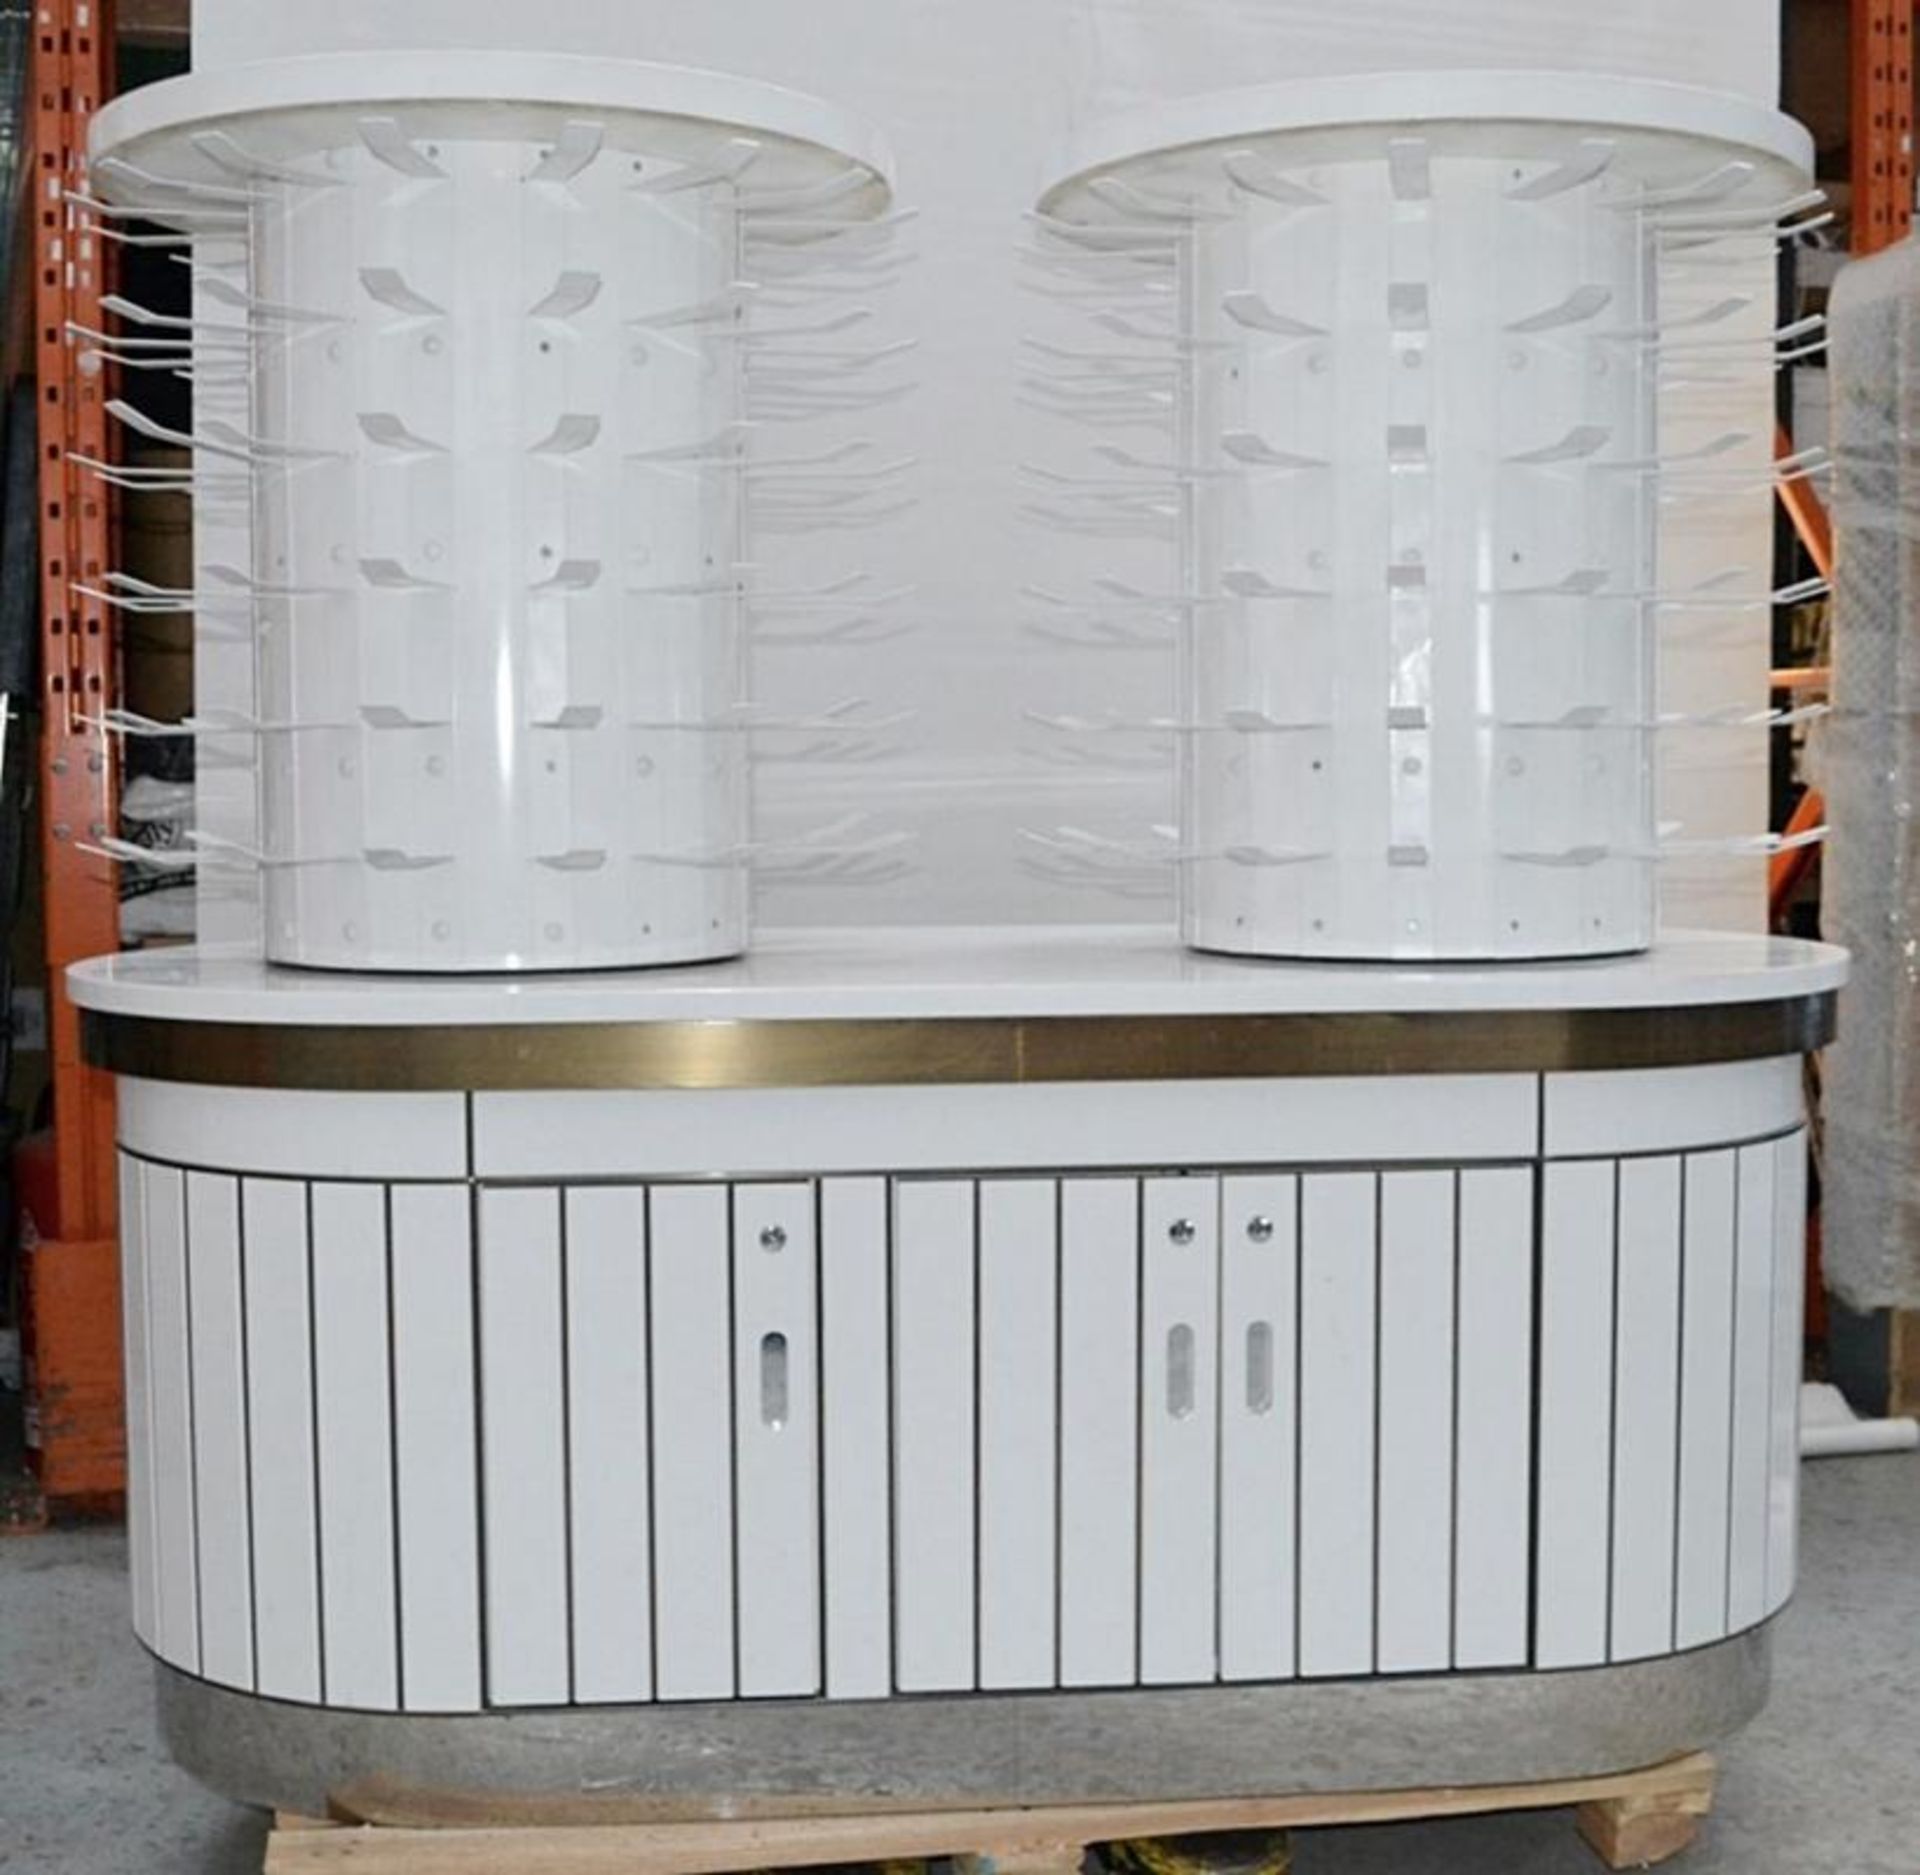 A Pair Of Curved Cosmetics Shop Counters With Revolving Carousels In White - Recently Removed From H - Image 8 of 8